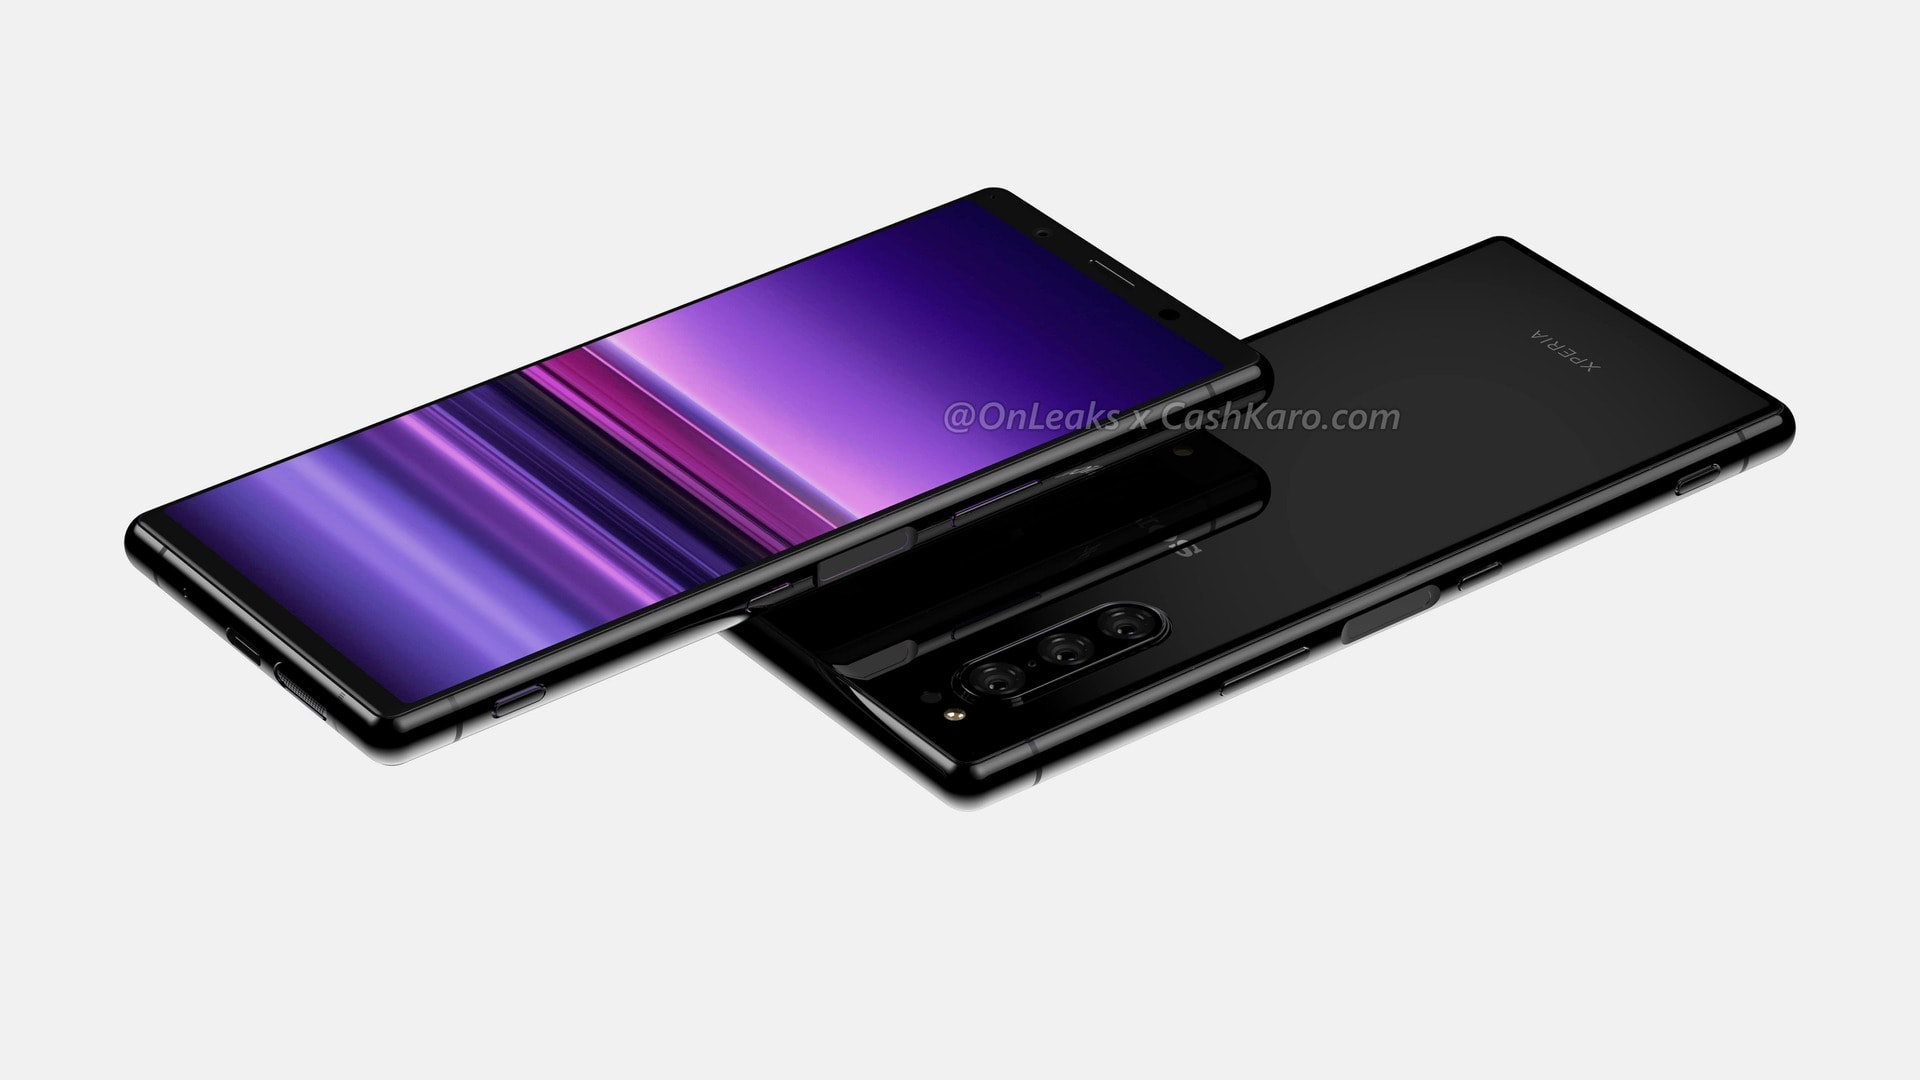 A leaked render of what appears to be the Sony Xperia 2.